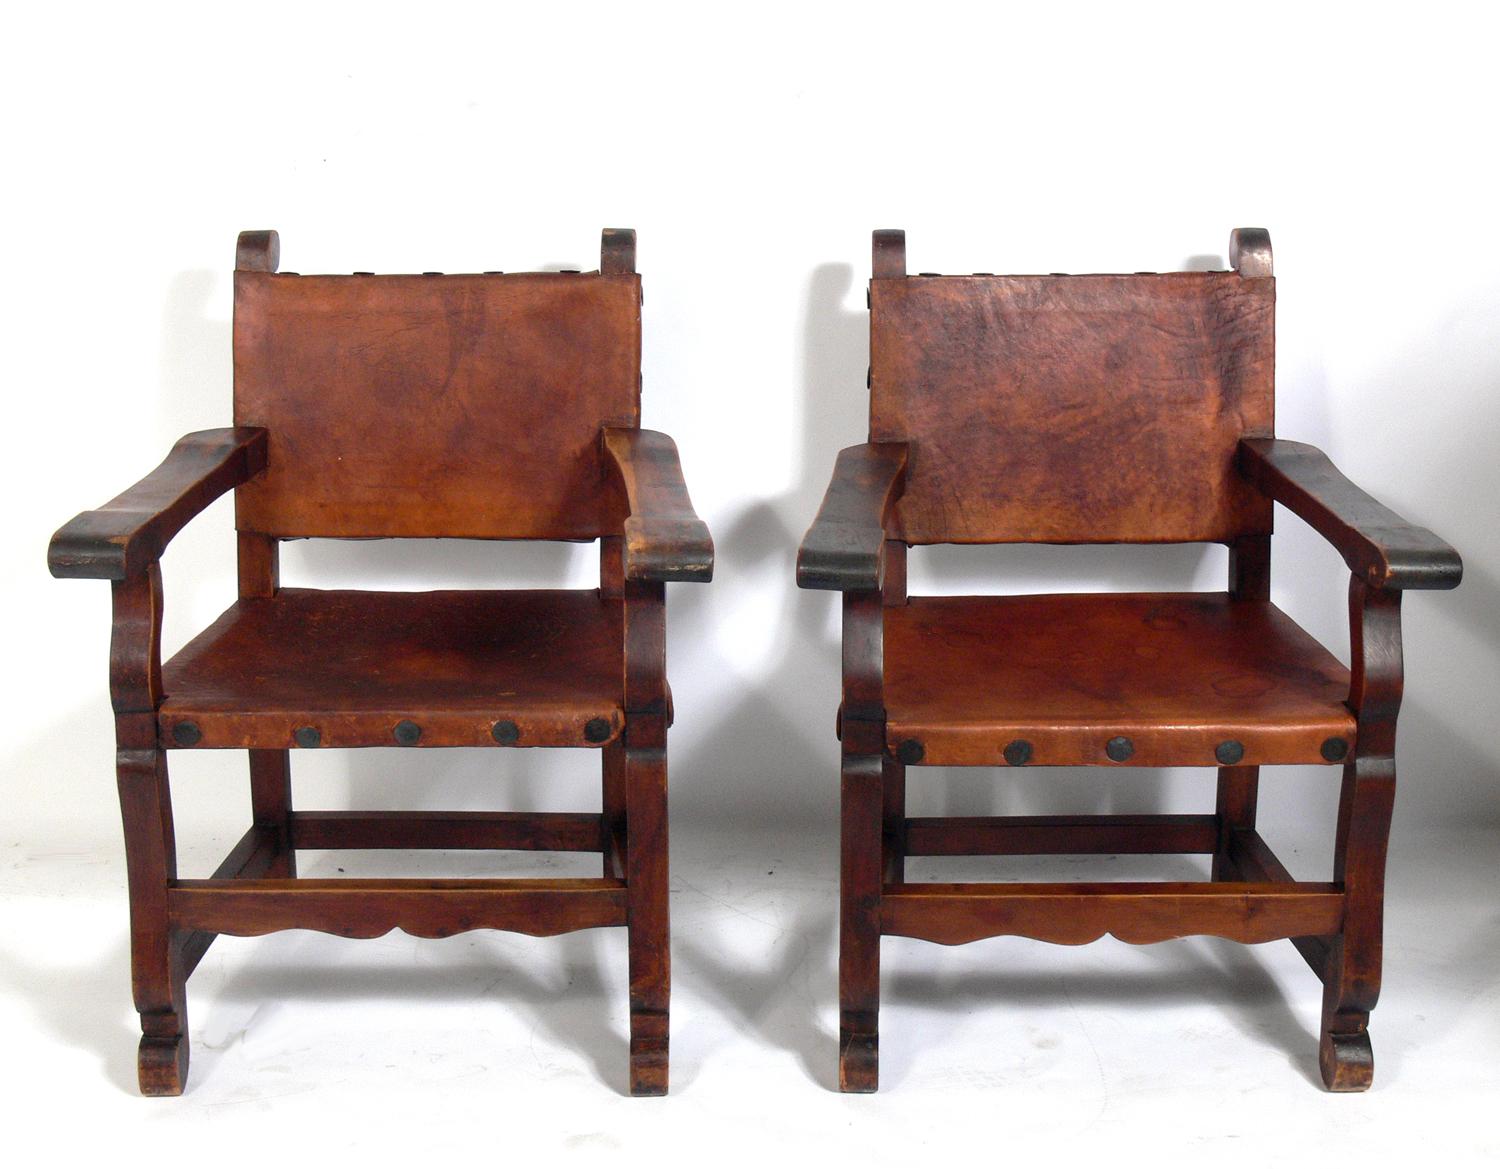 Pair of Mexican leather arm chairs, Mexico, circa 1950s. They retain their original distressed patina. They would be perfect in a California or Mexican hacienda or anywhere you want the organic rustic vibe of aged leather and wood.